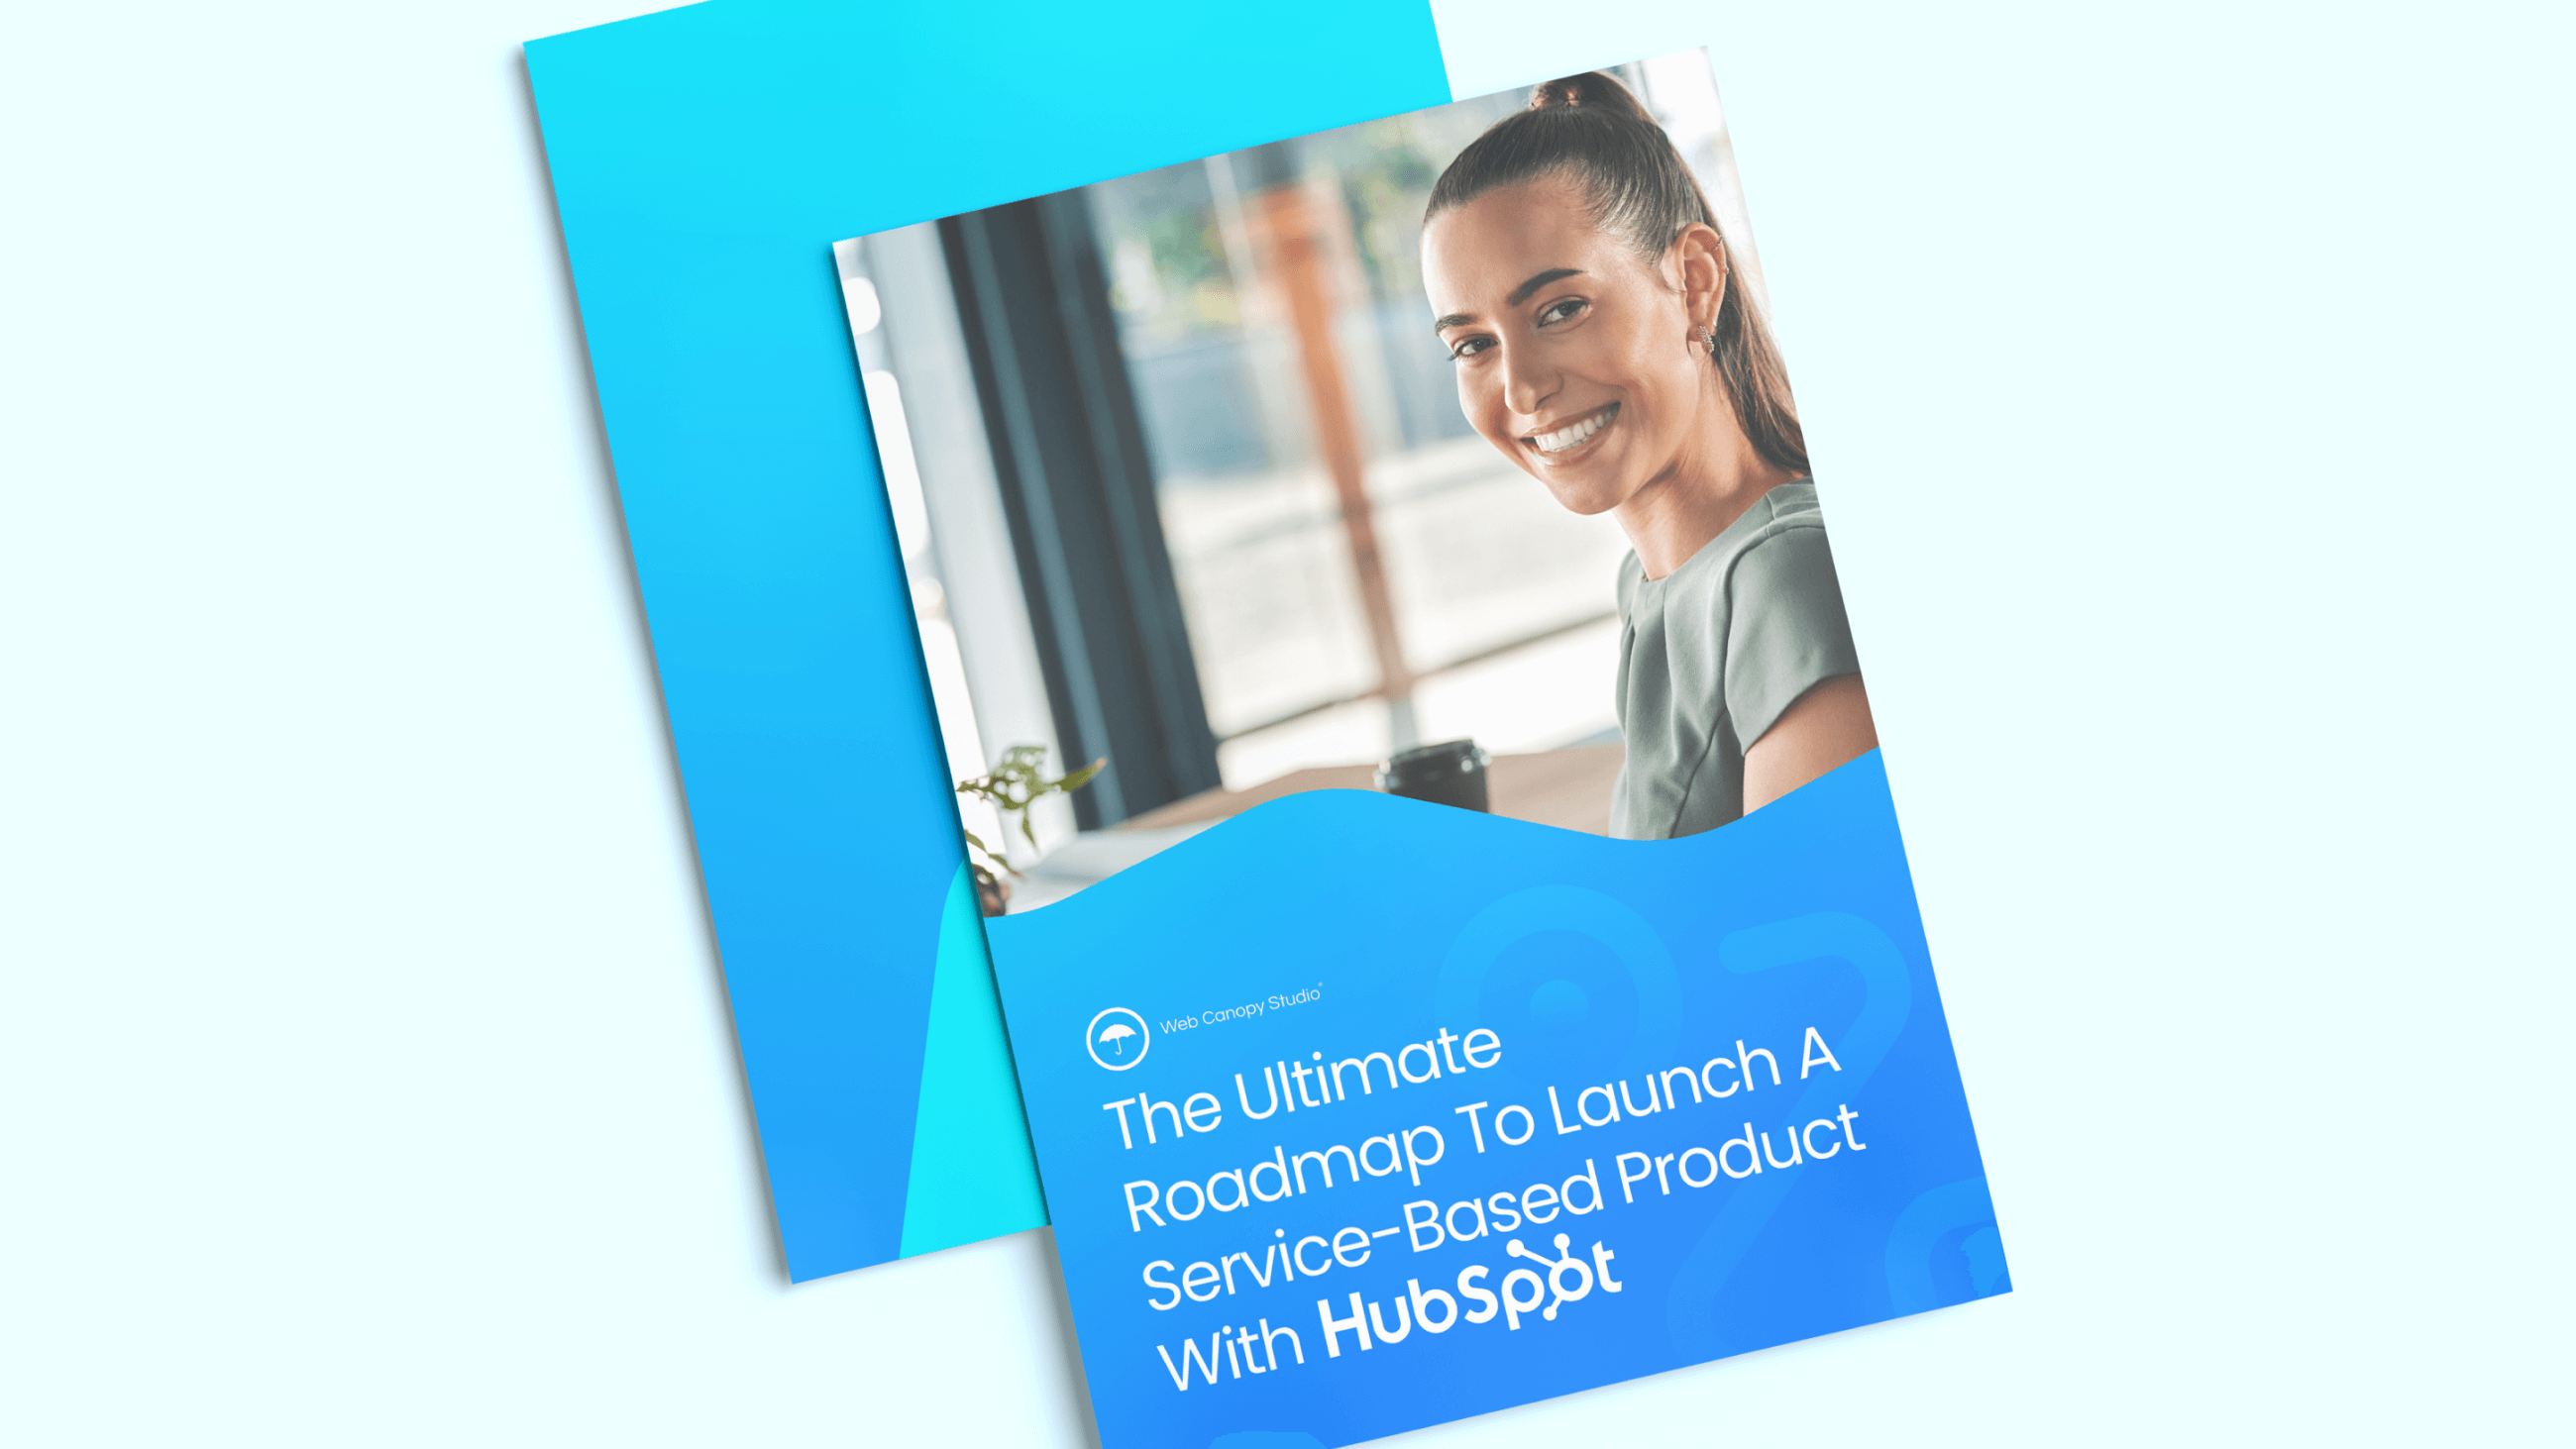 The Ultimate Guide to Launch a Service-Based Product with Hubspot